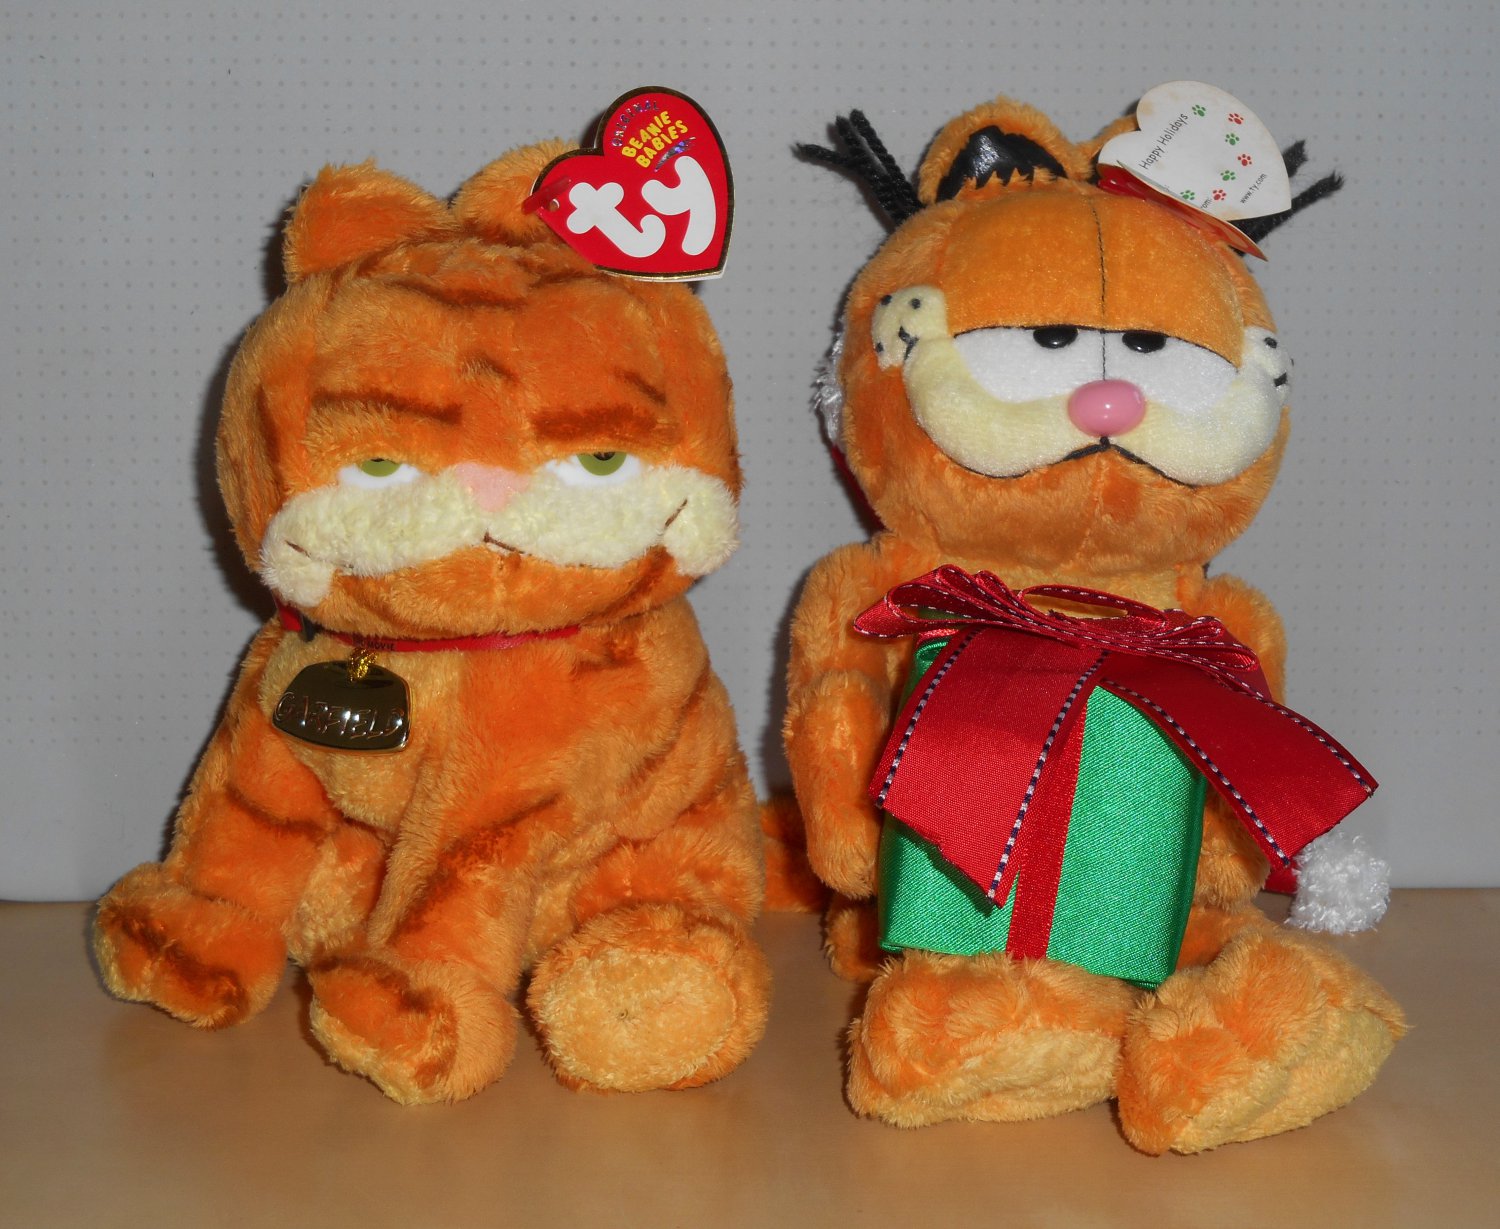 Garfield the Cat TY Beanie Babies Plush Happy Holidays & The Movie PAWS 2004 2005